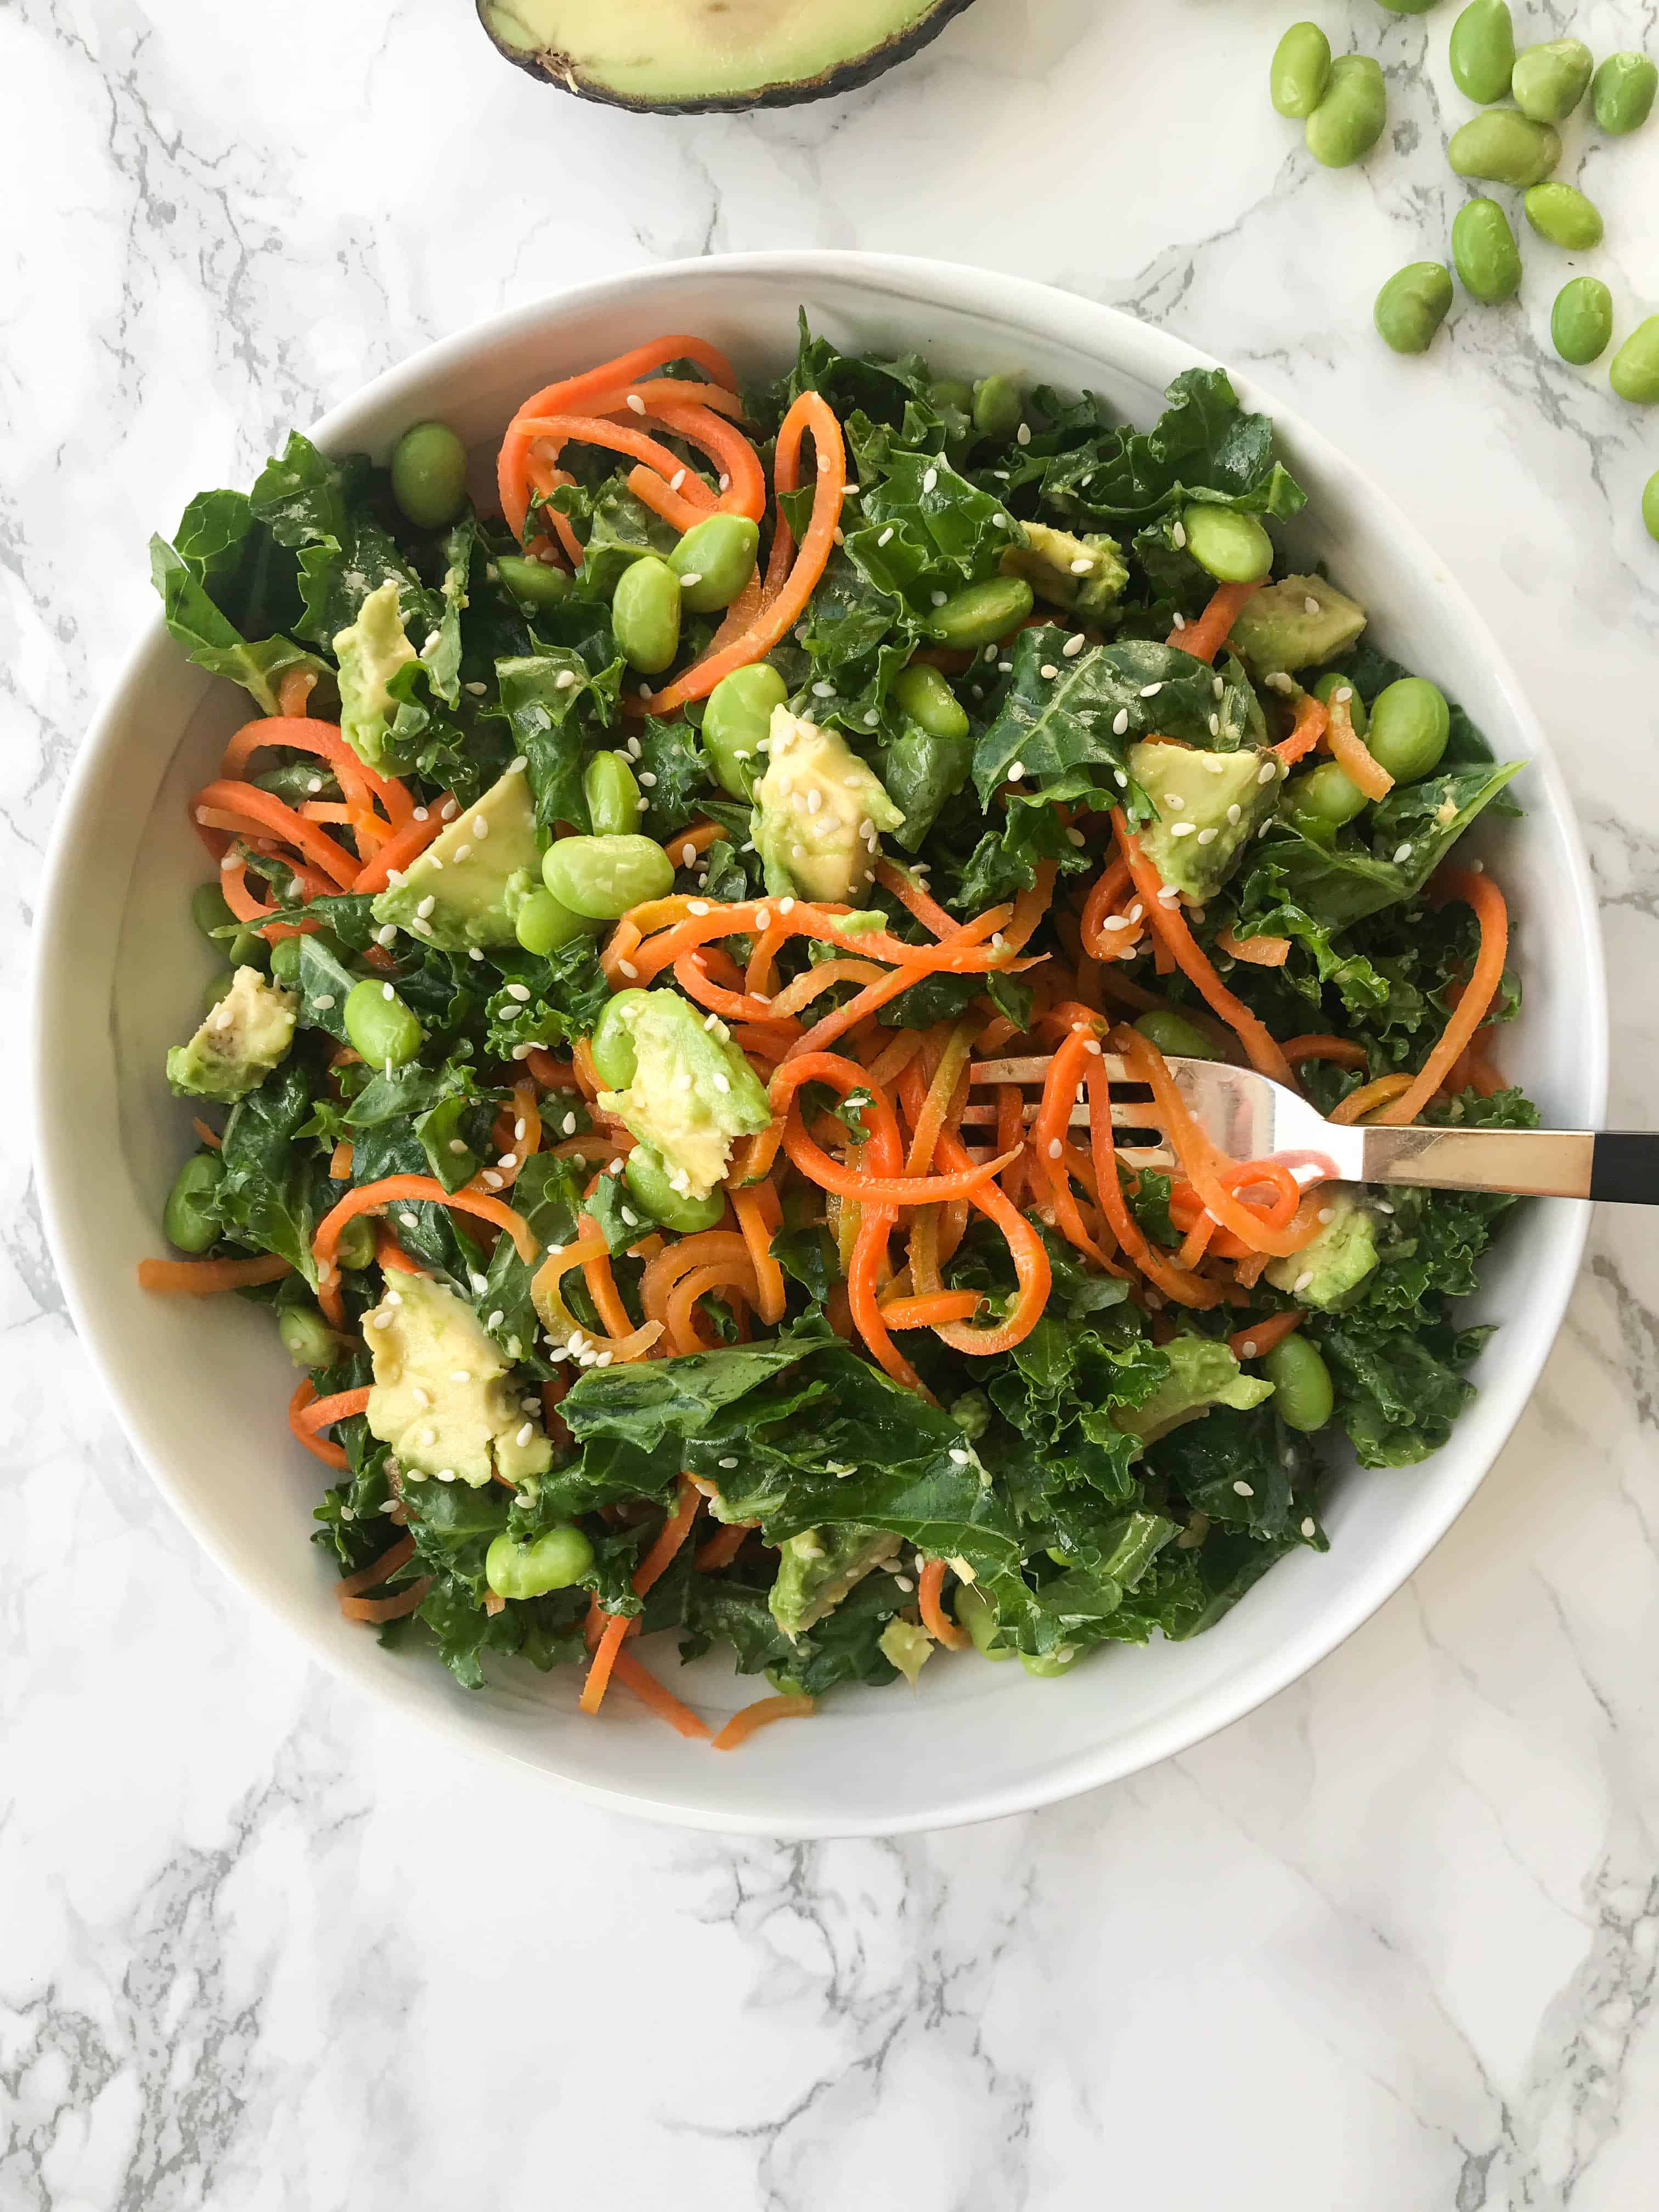 Kale, Edamame and Carrot Noodle Salad with Ginger-Sesame Sauce